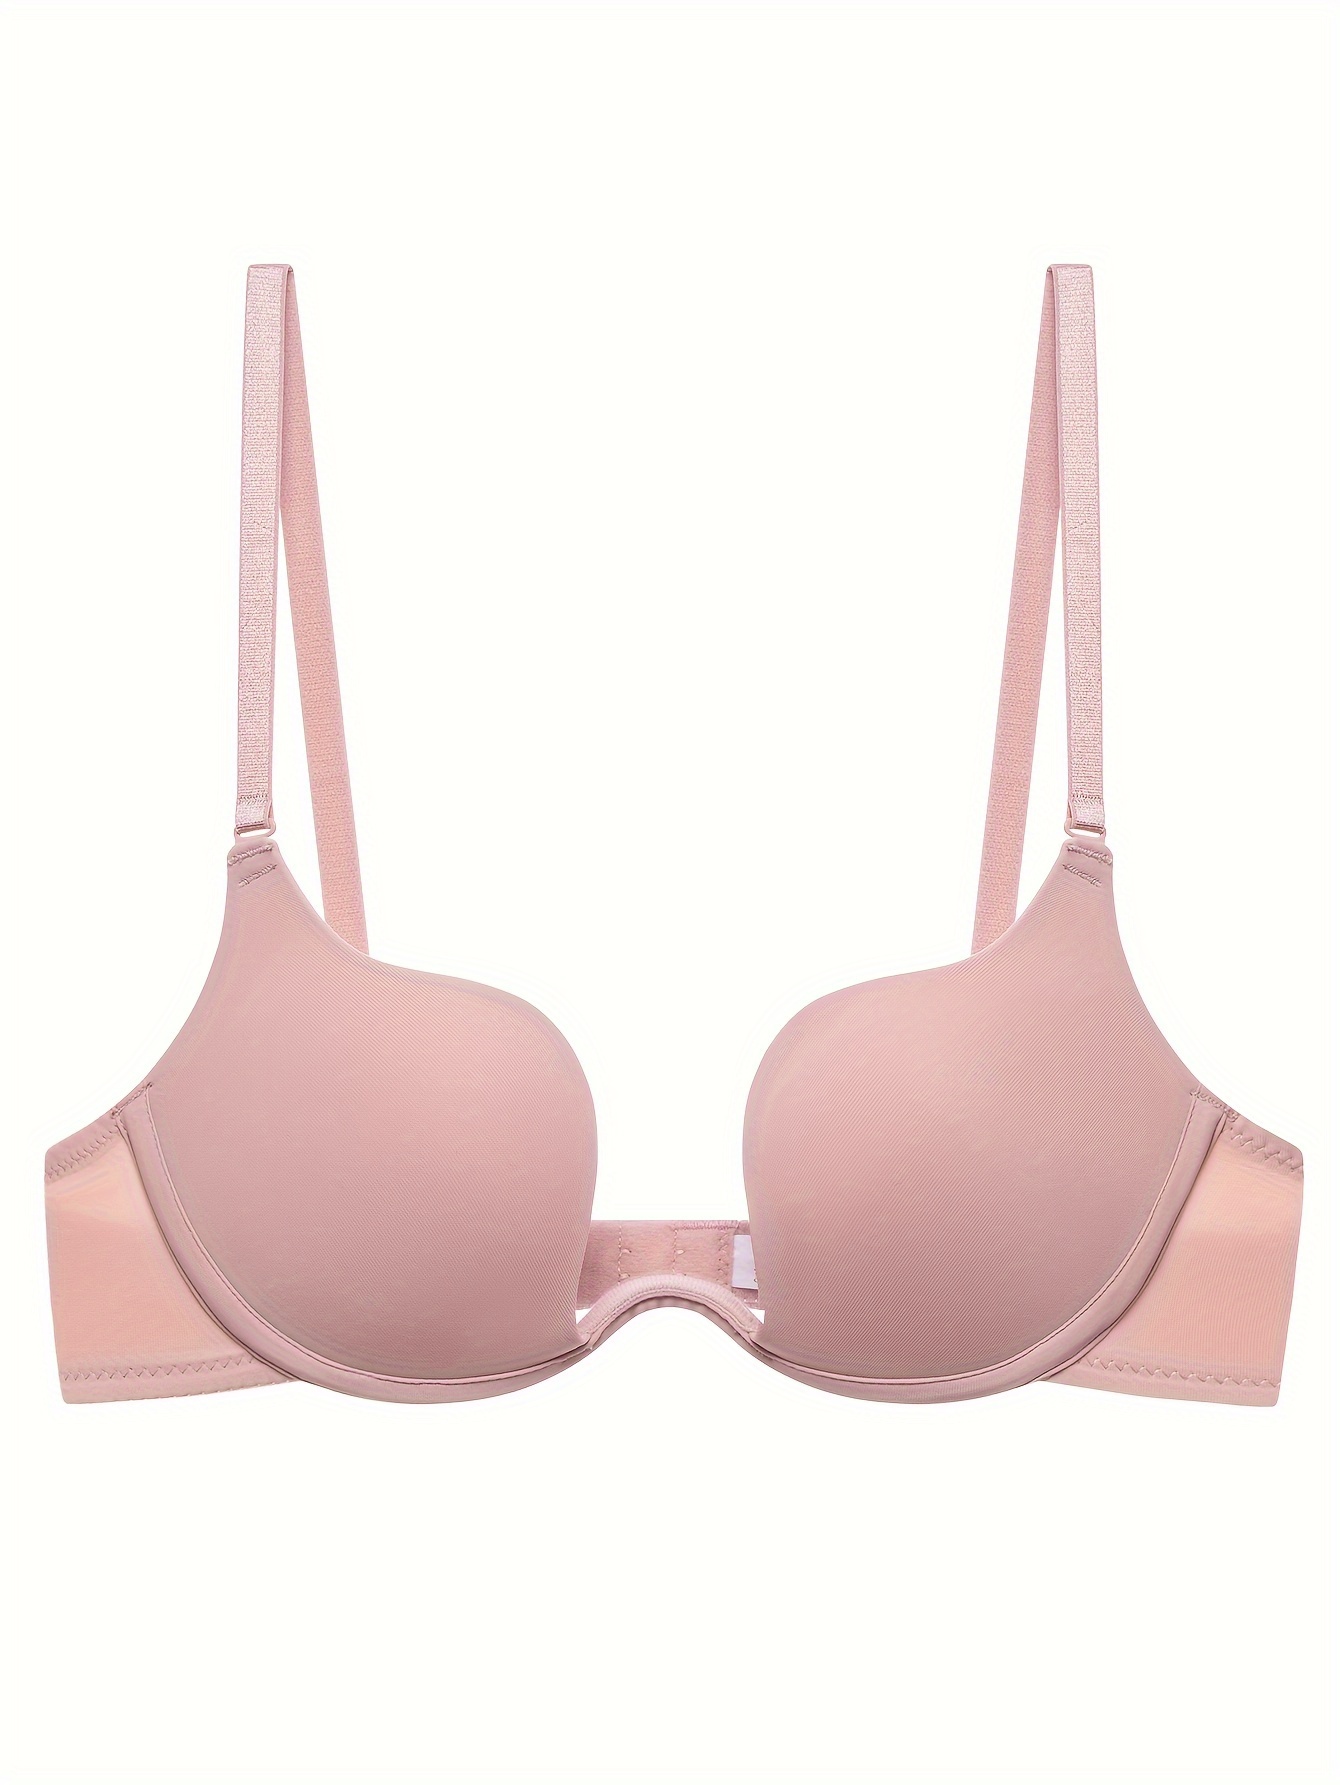 Victoria's Secret PINK - Push-Up Bralettes = what you need for all